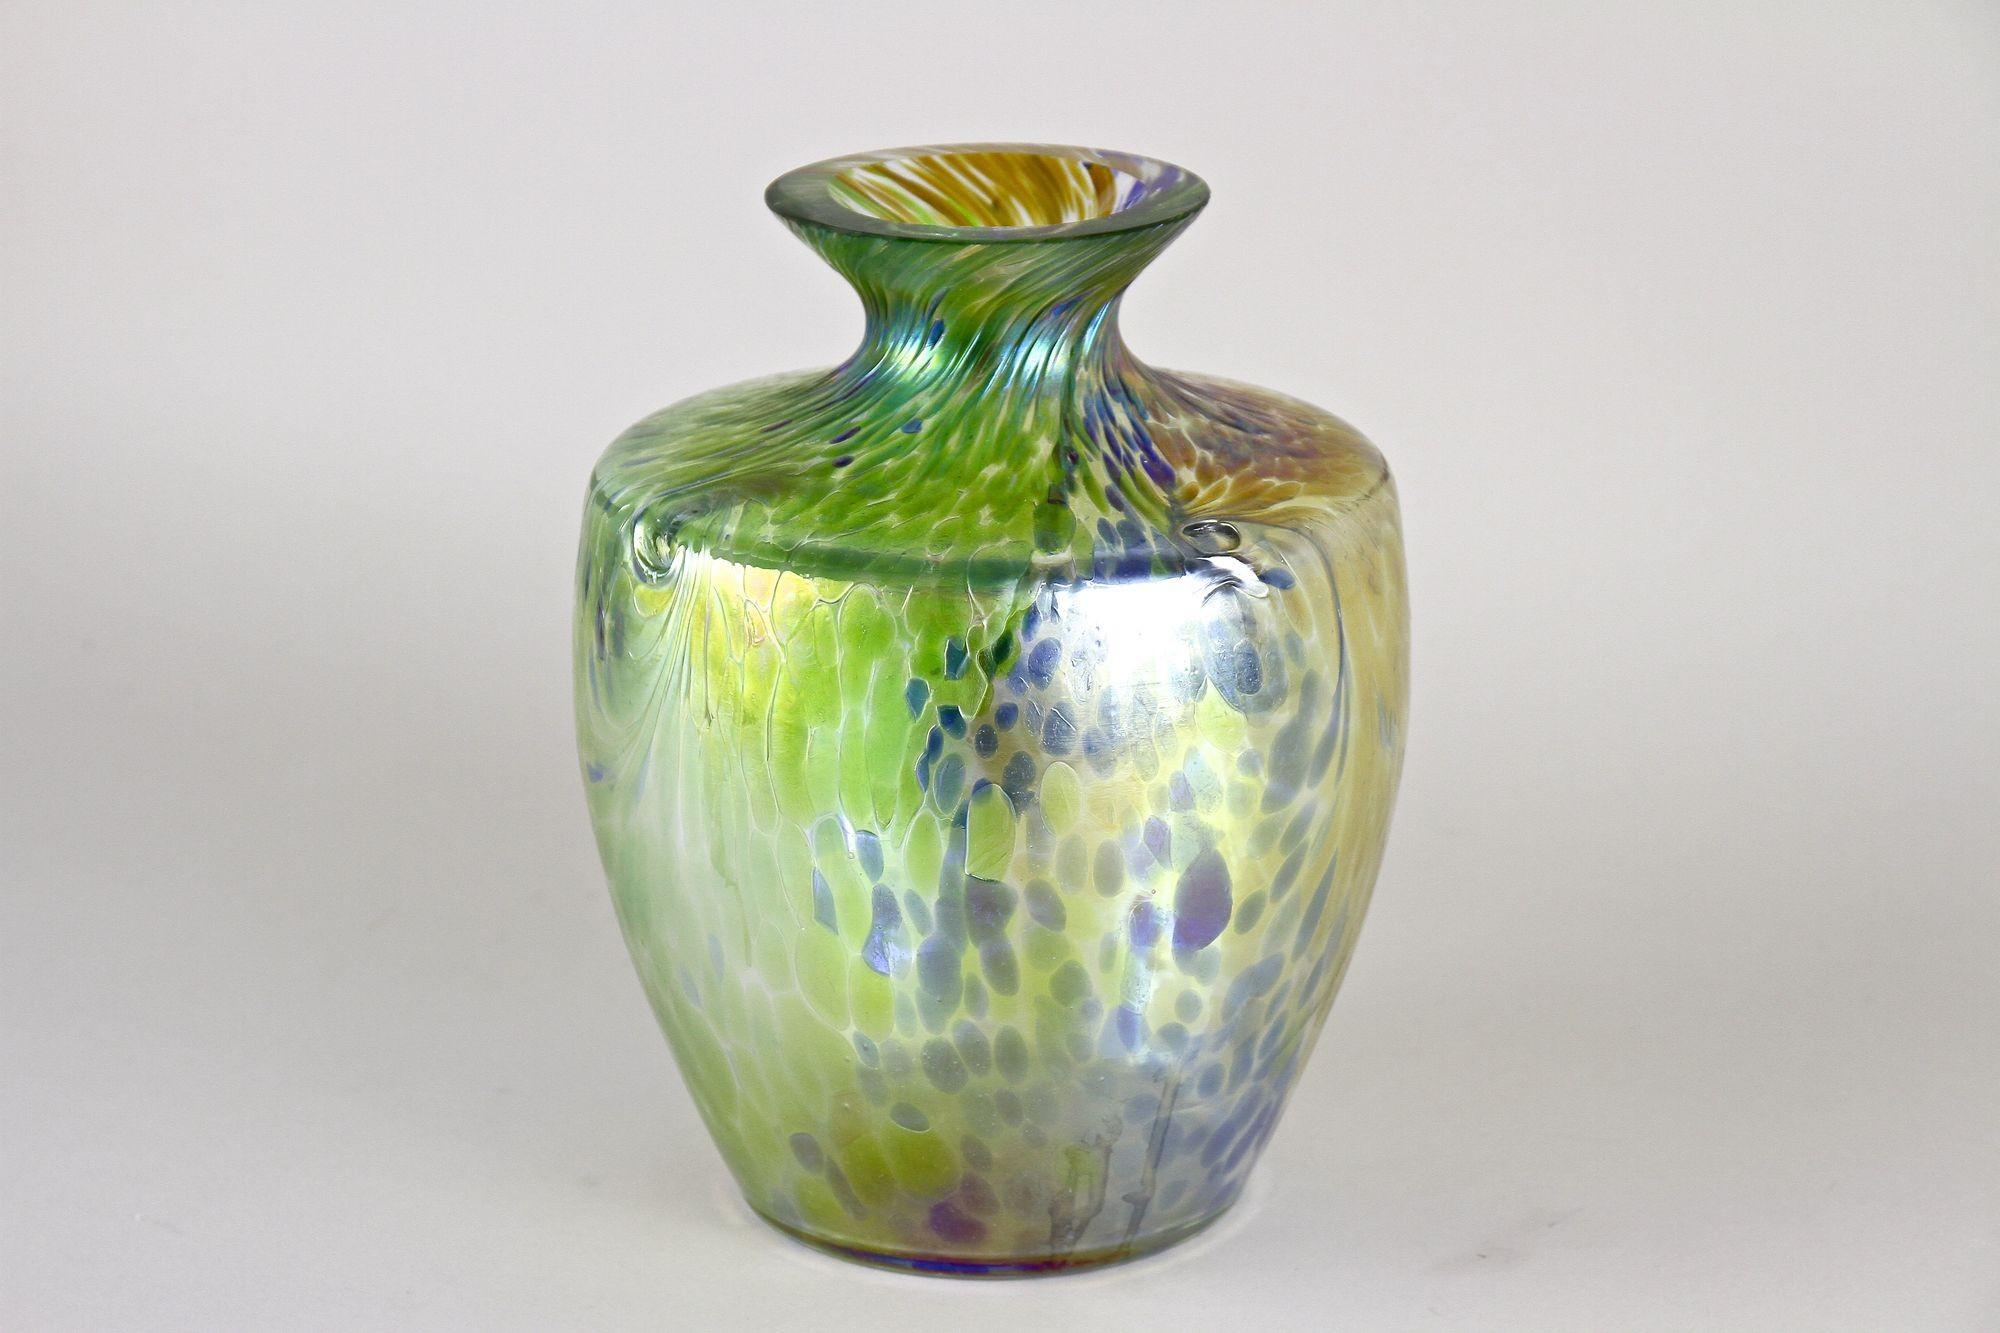 Iridescent Art Nouveau Glass Vase Attributed To Fritz Heckert, Bohemia ca. 1905 For Sale 2